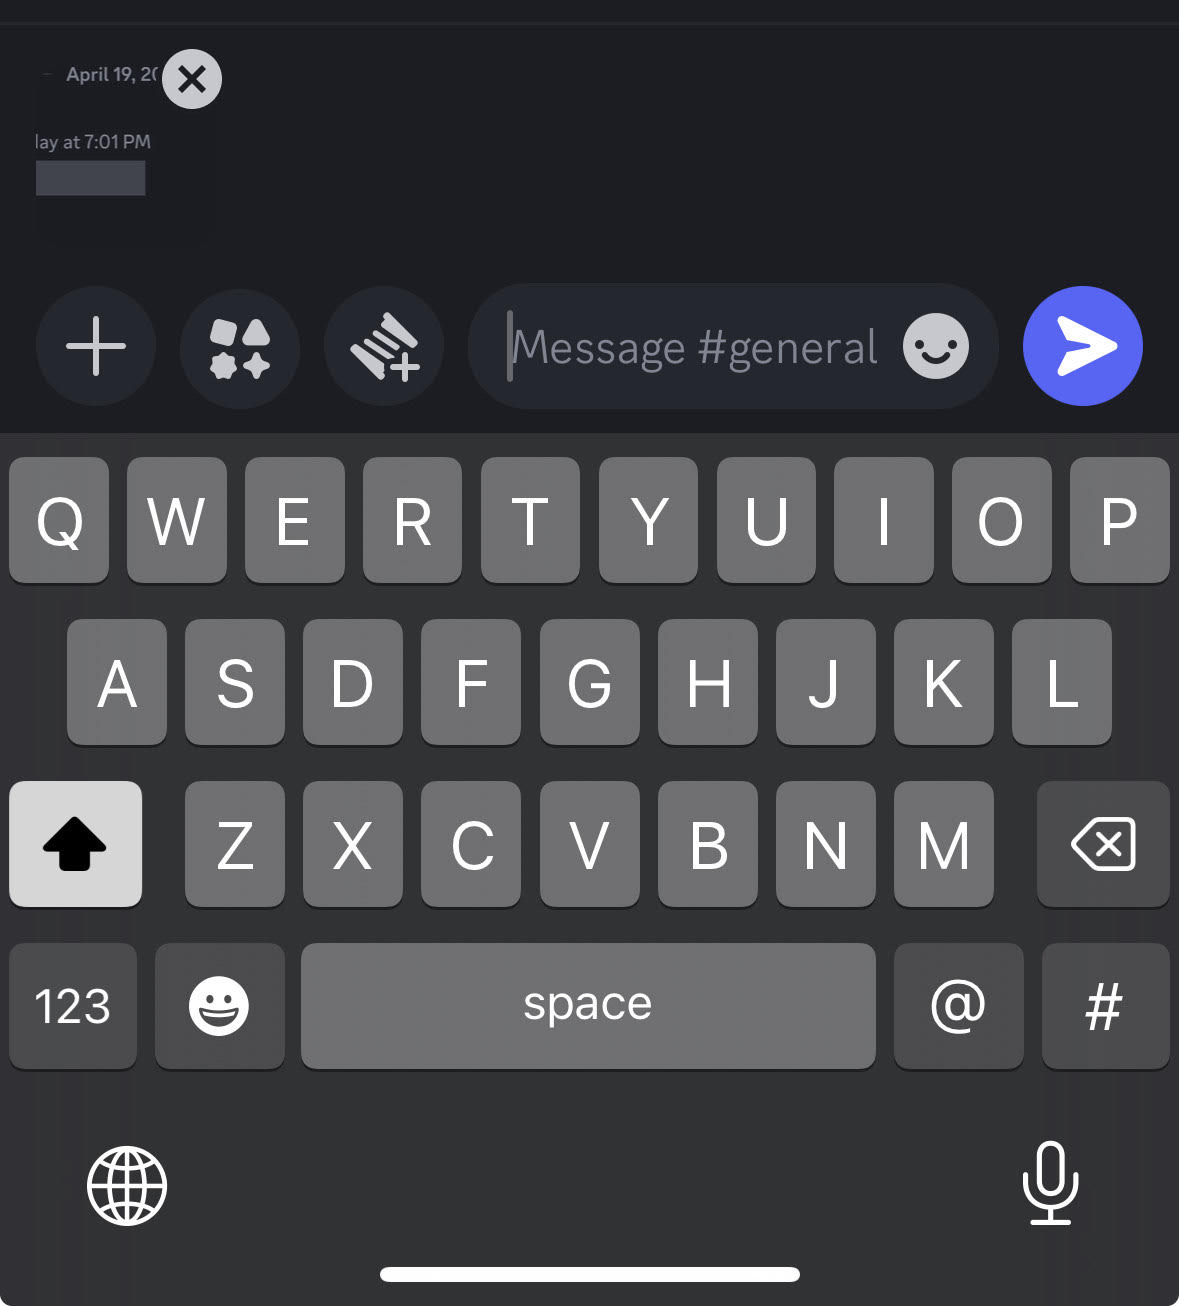 How To Spoiler Tag On Discord: Hide Messages, Images, Videos 19